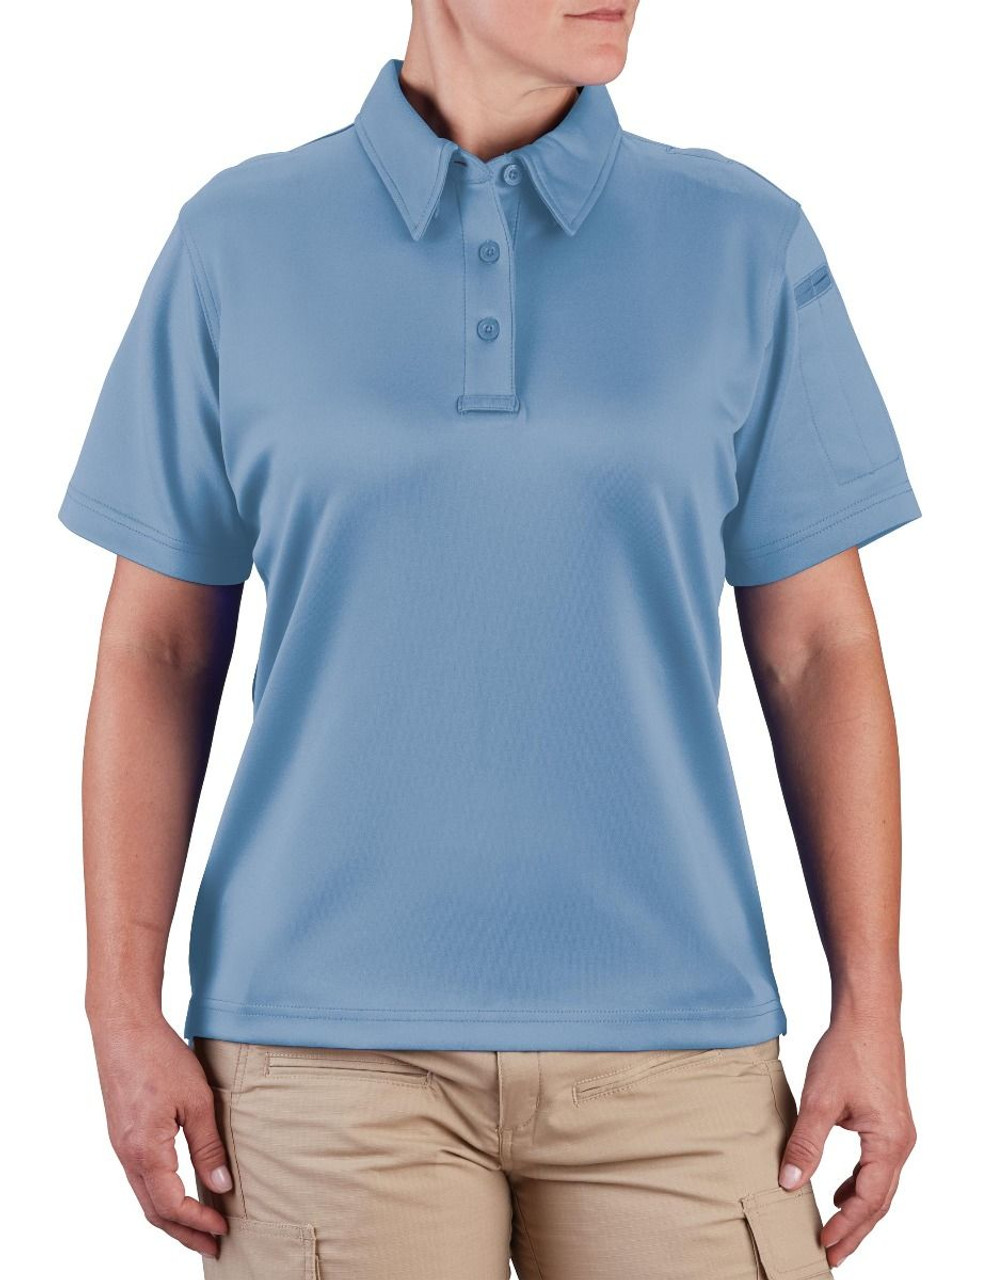 Propper F5327-72 Women's I.C.E.® Tactical Polo, Short Sleeve, Polyester/Spandex,  includes sternum and shoulder loops, and 2 channel pocket pen